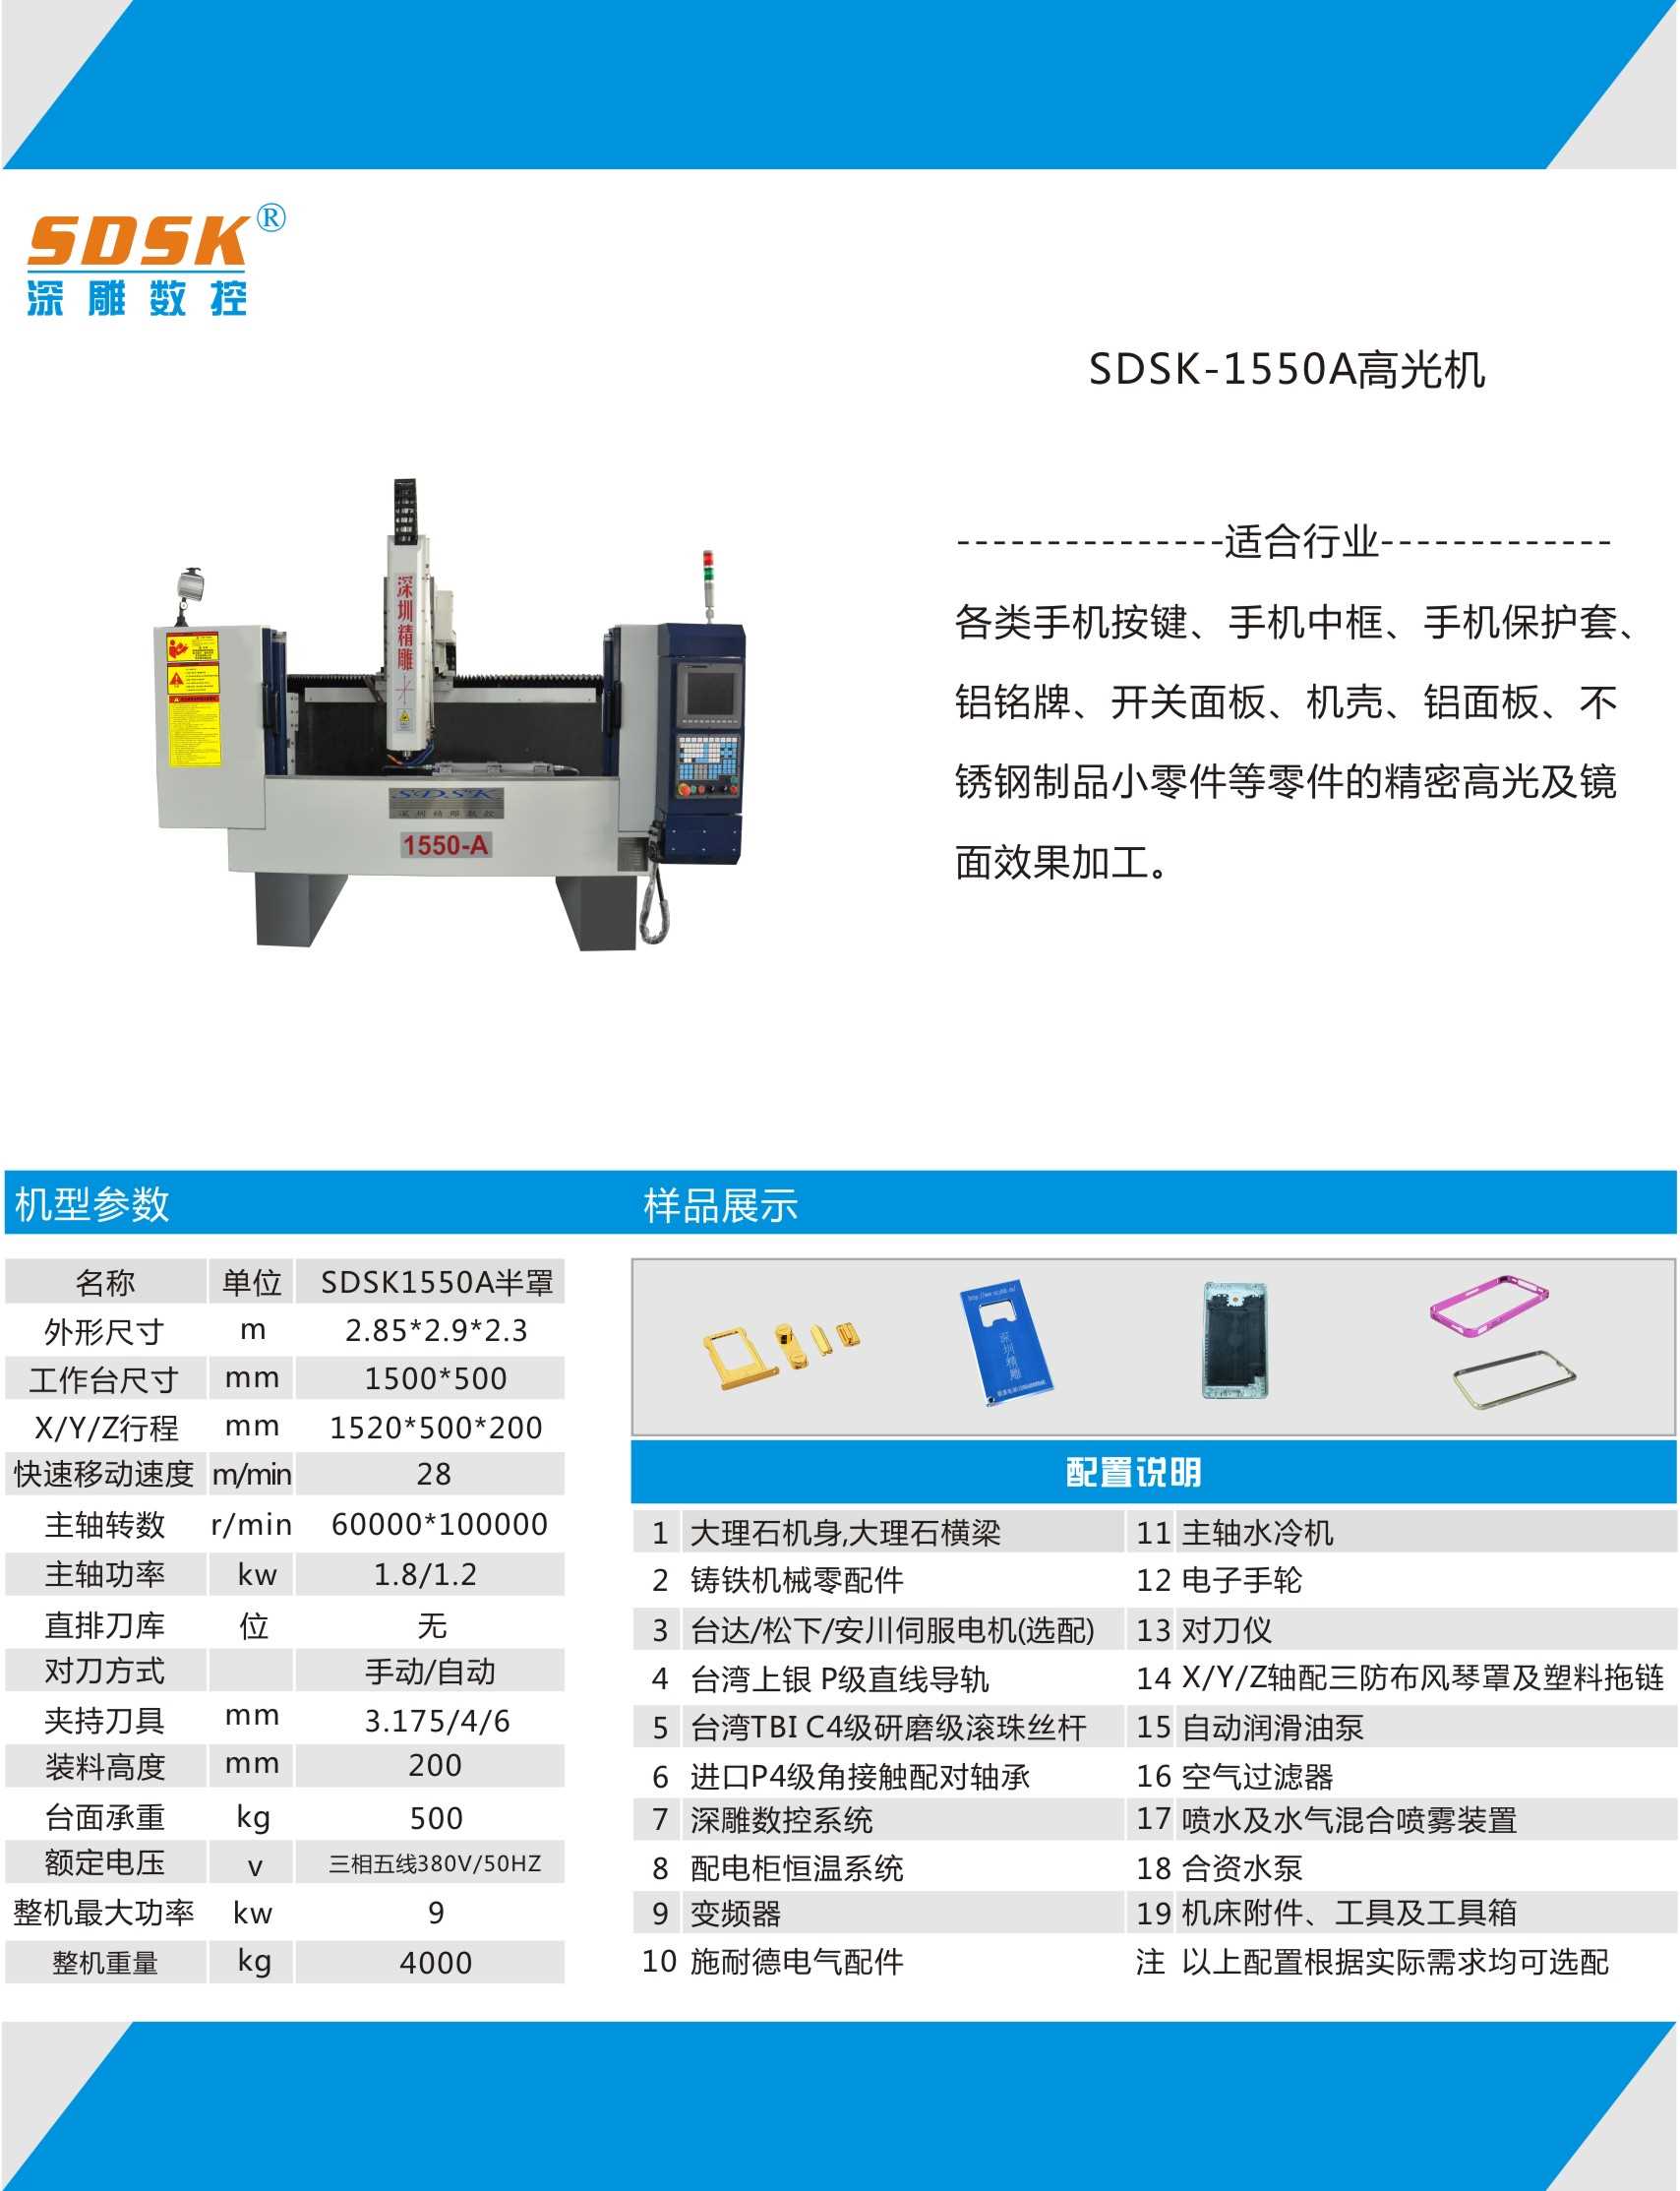 In 2018, Shenzhen Jingdiao CNC Equipment Co., Ltd. is preparing to launch a new variety of dazzling high gloss machines.